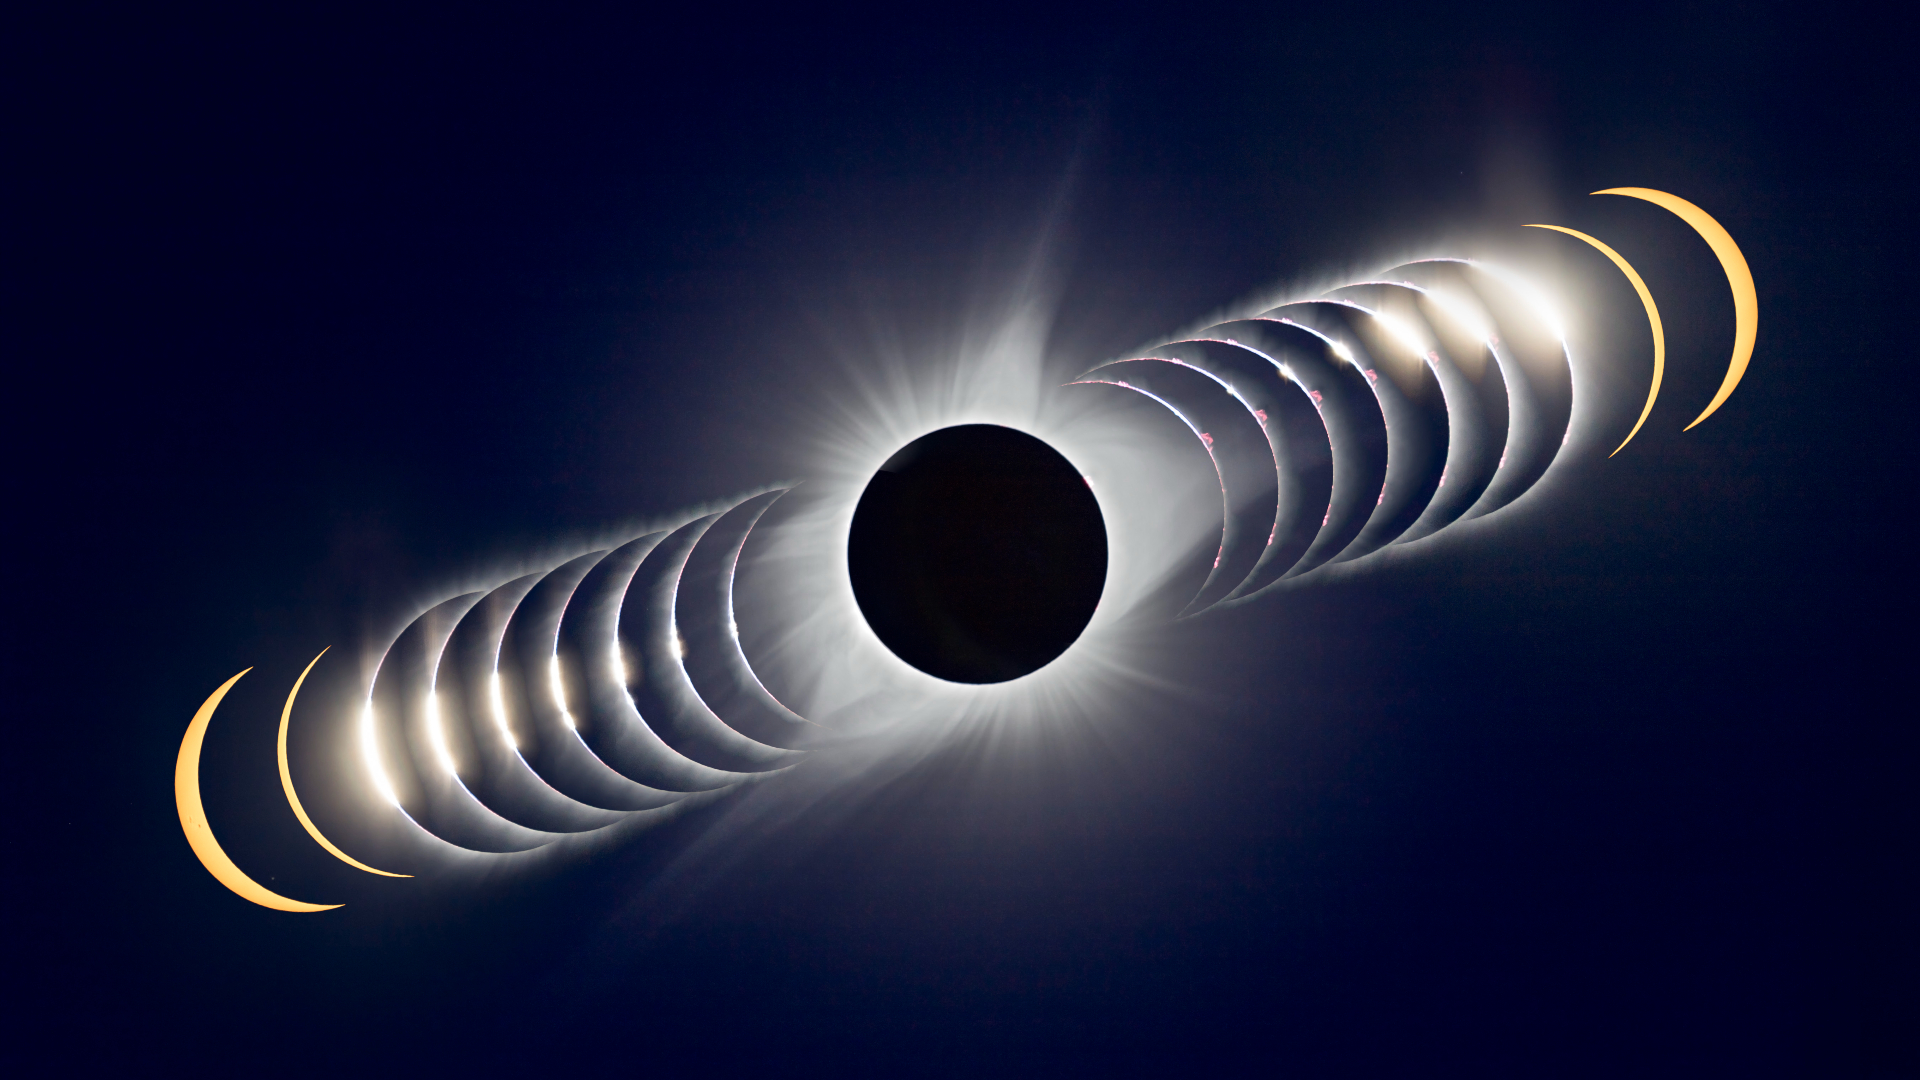 During Eclipses, Astronomers Try to Reveal the Secrets of the Solar Wind